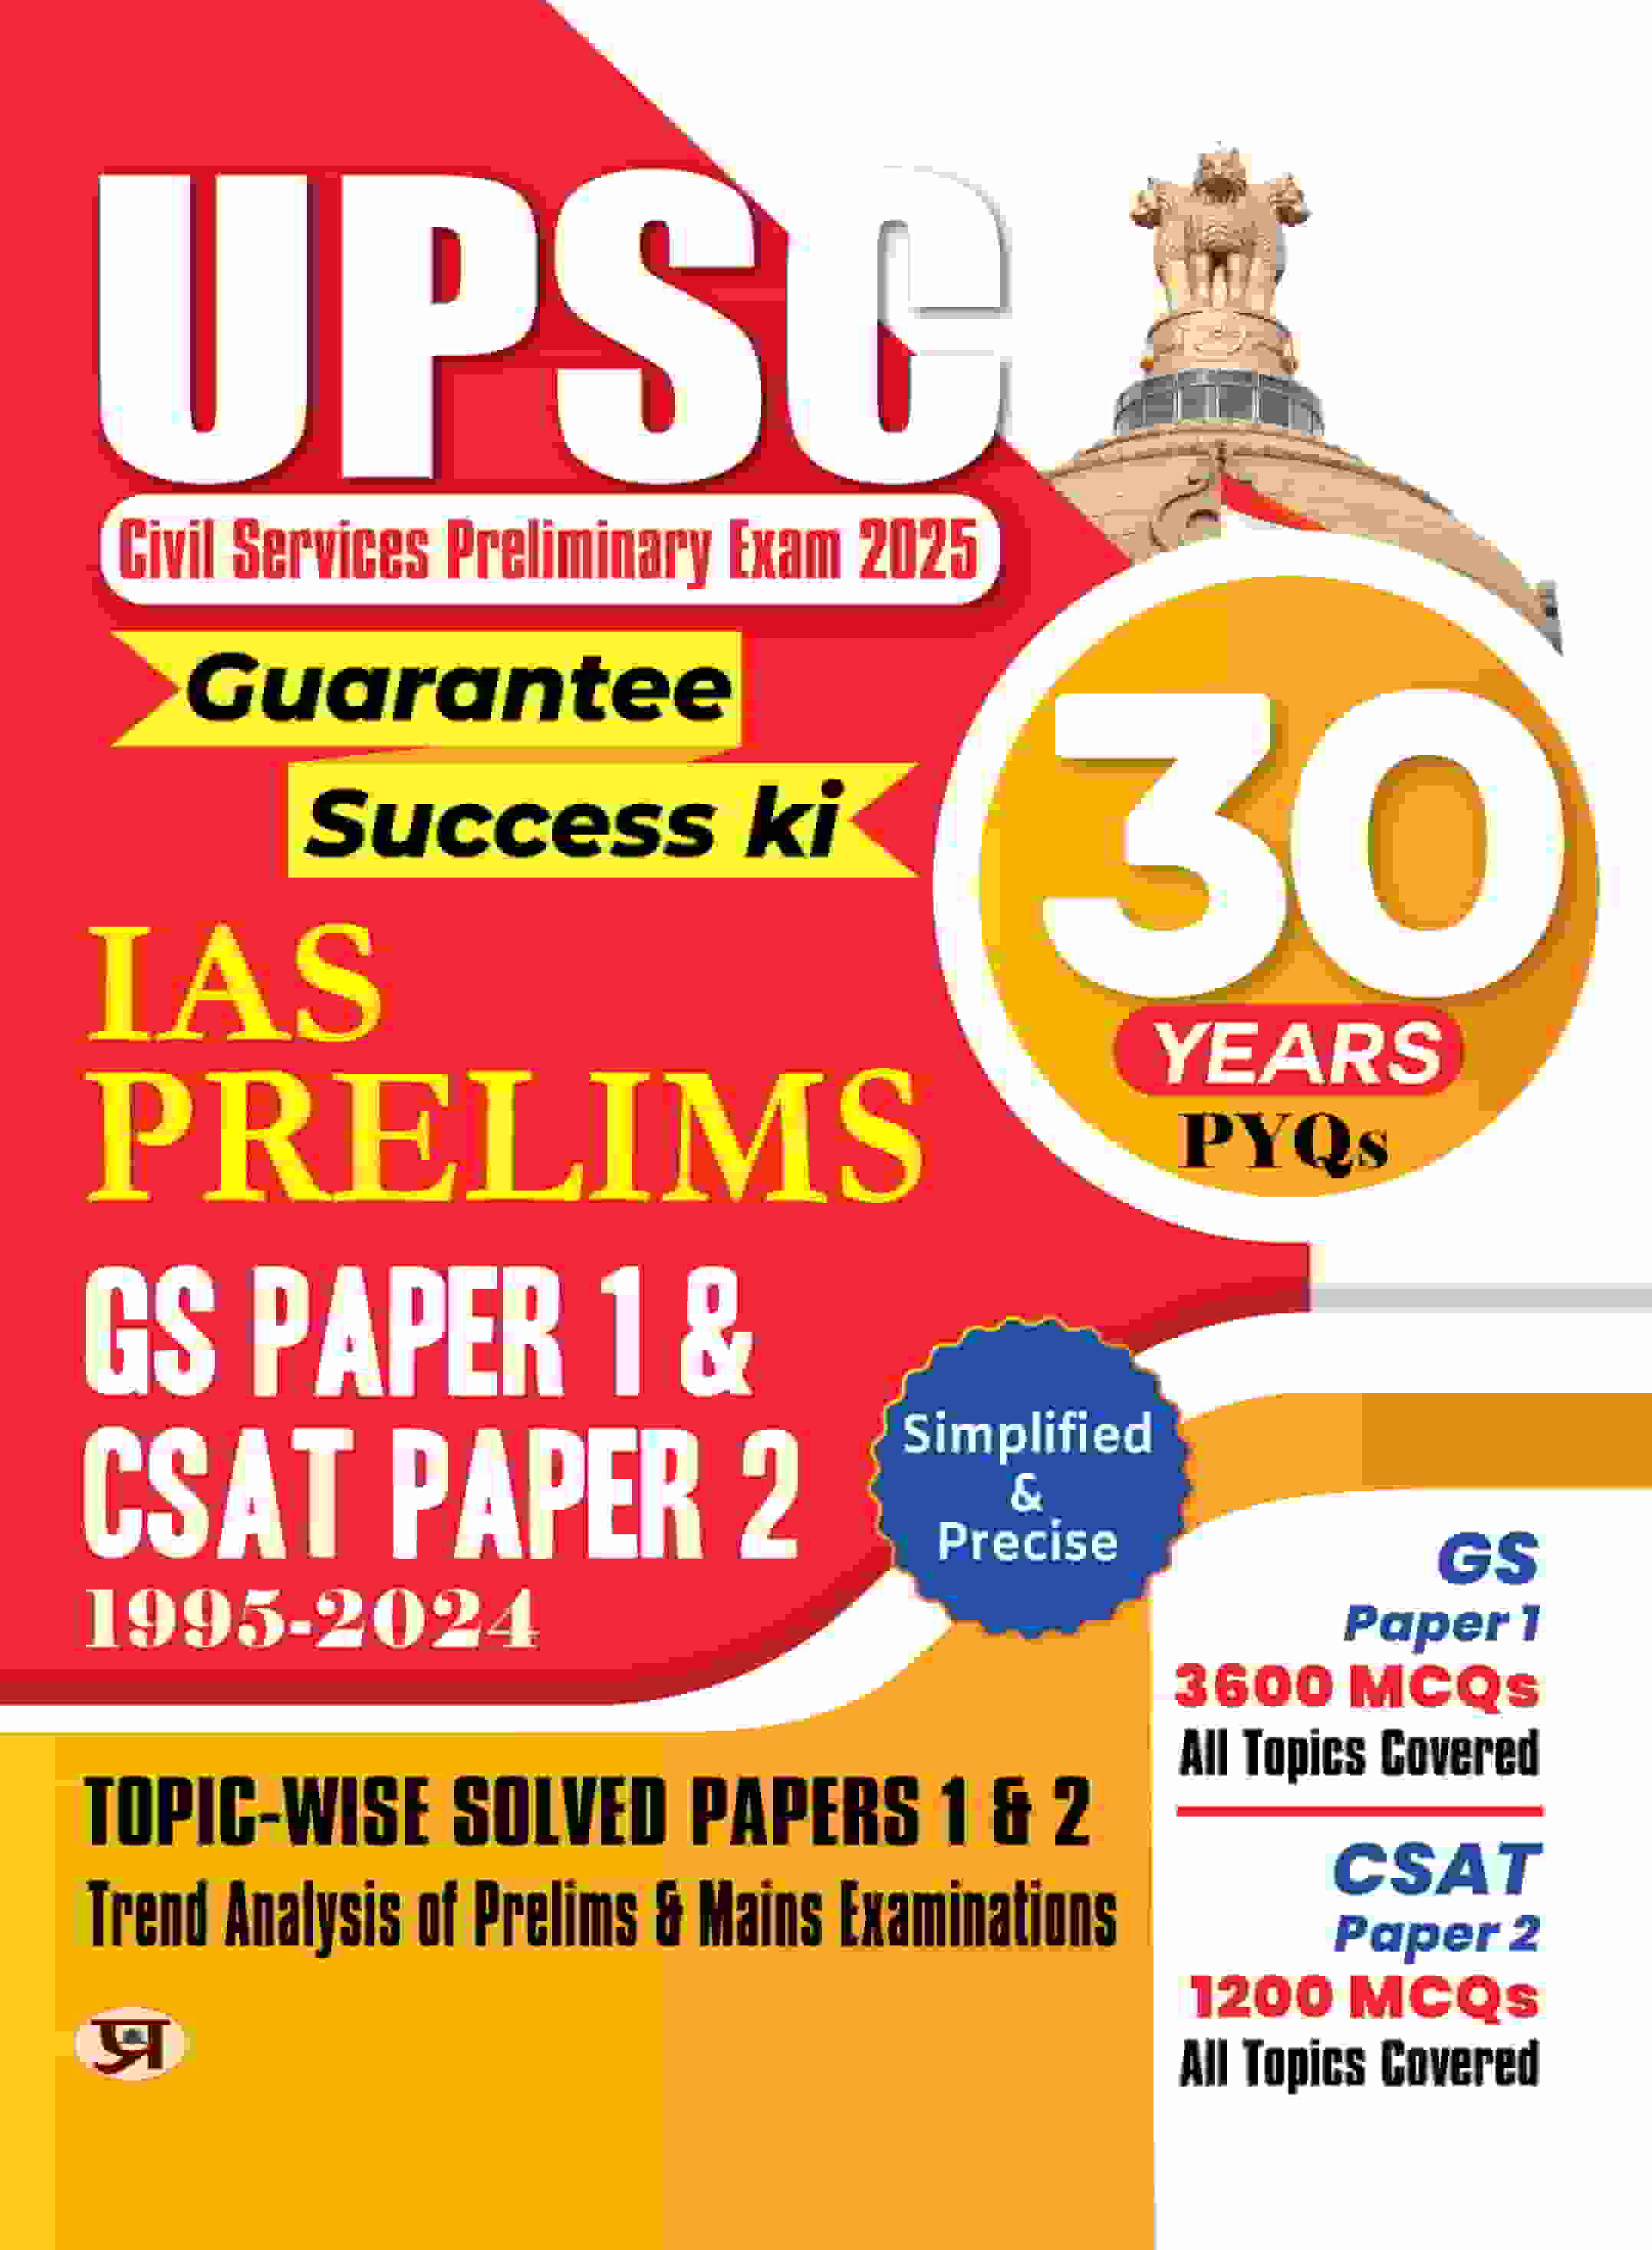 30 Years UPSC Prelims Civil Services Exam 2025 | IAS Prelims Topic-wise Solved Papers 1 & 2 (1995-2024) | General Studies & Aptitude (CSAT) MCQs | PYQs Previous Year Questions Bank Guide (UPSC 30 Years Solved Prelims)